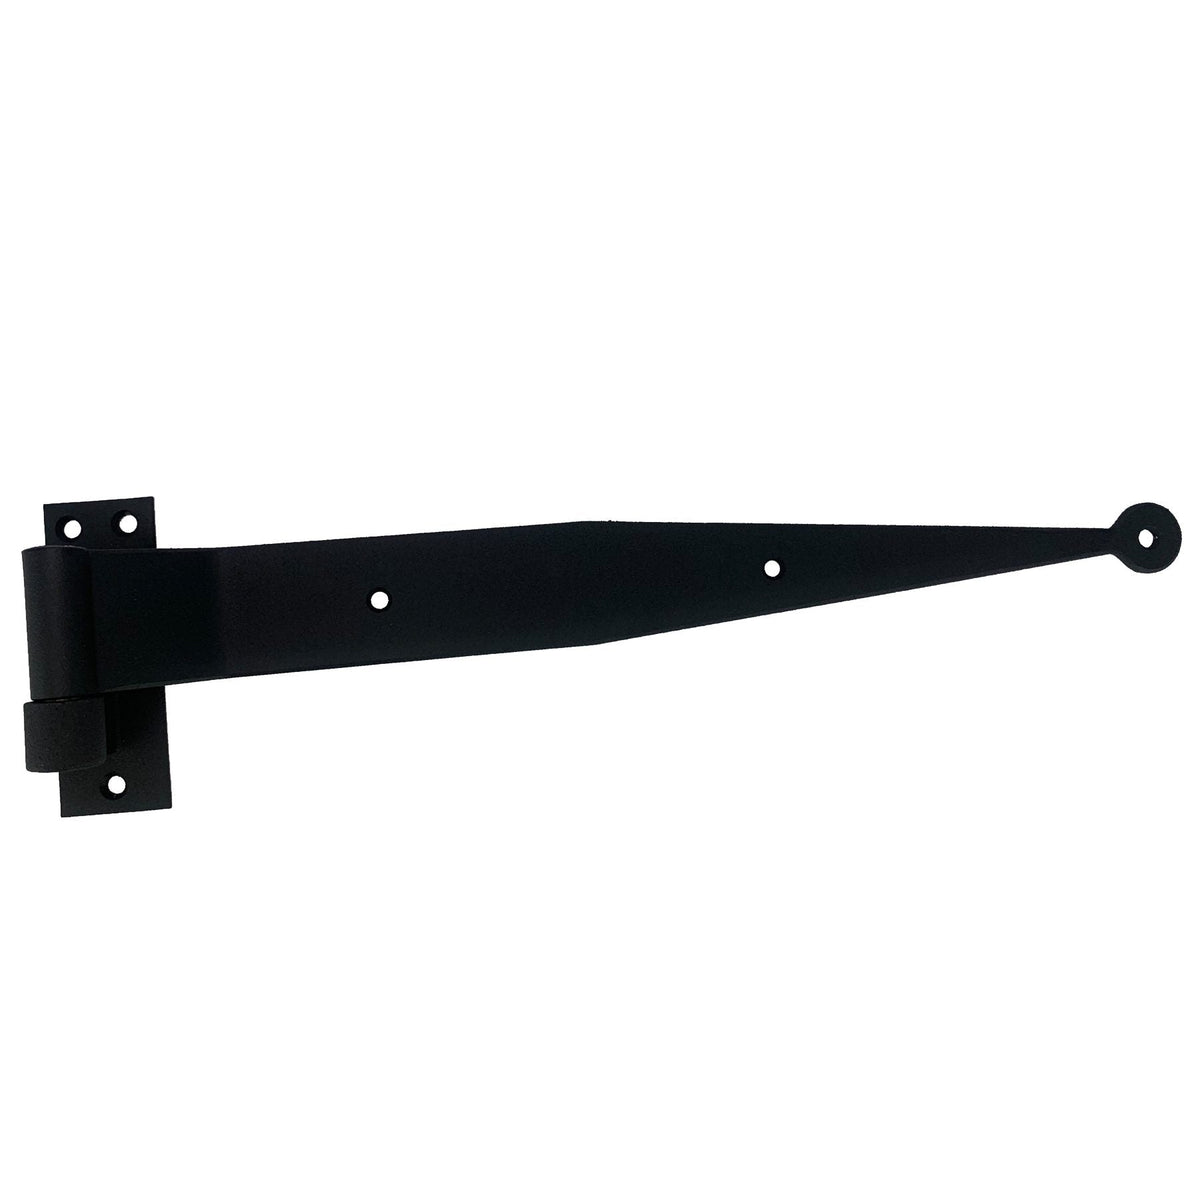 Strap Hinge for Shutters - Stainless Steel - Circle Tip - 12" Inch - 1-1/2" Inch Offset - Black Powder Coat - Sold Individually